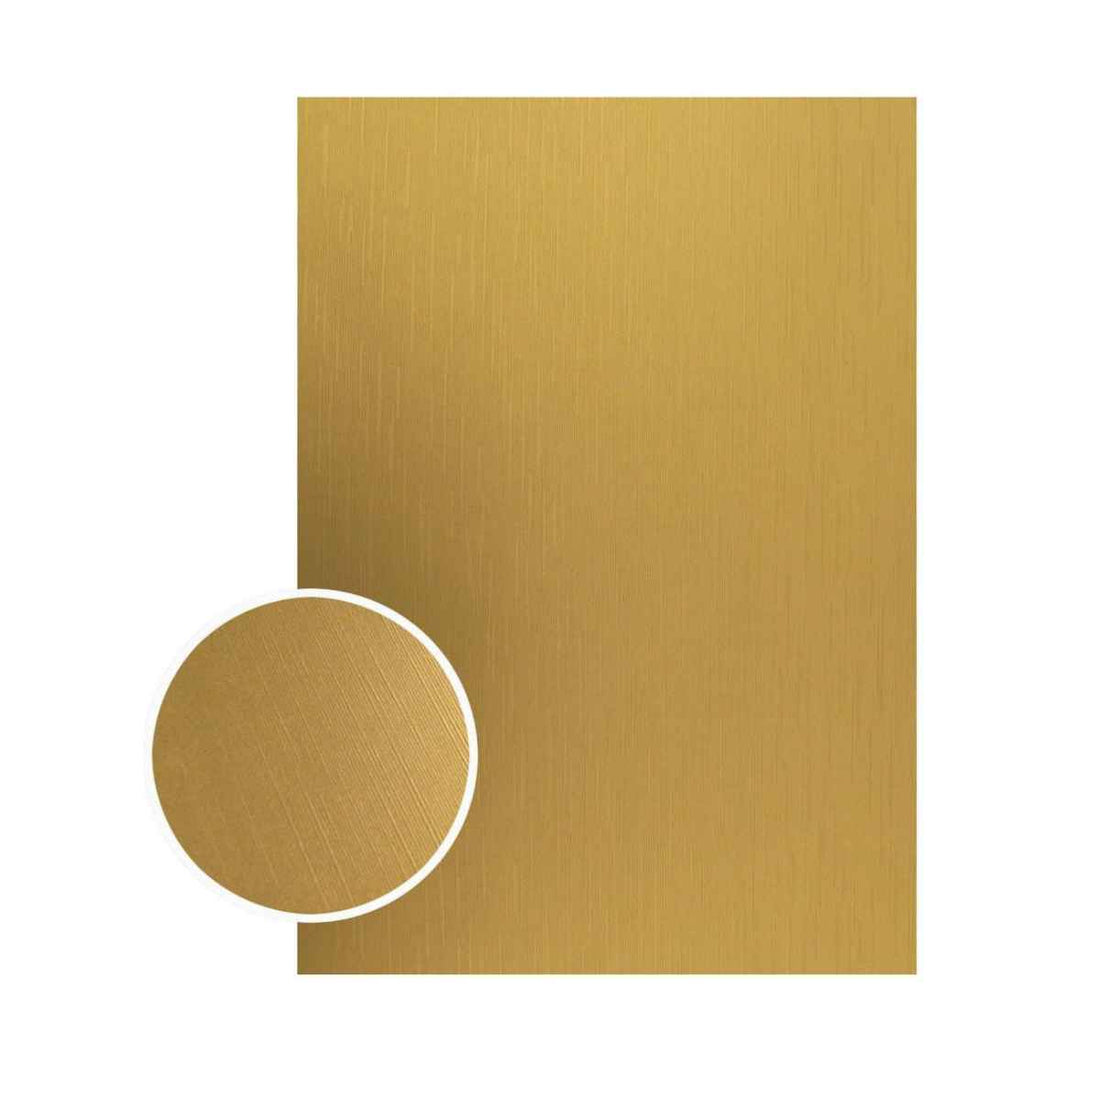 Matte gold mirror foil board with textured line